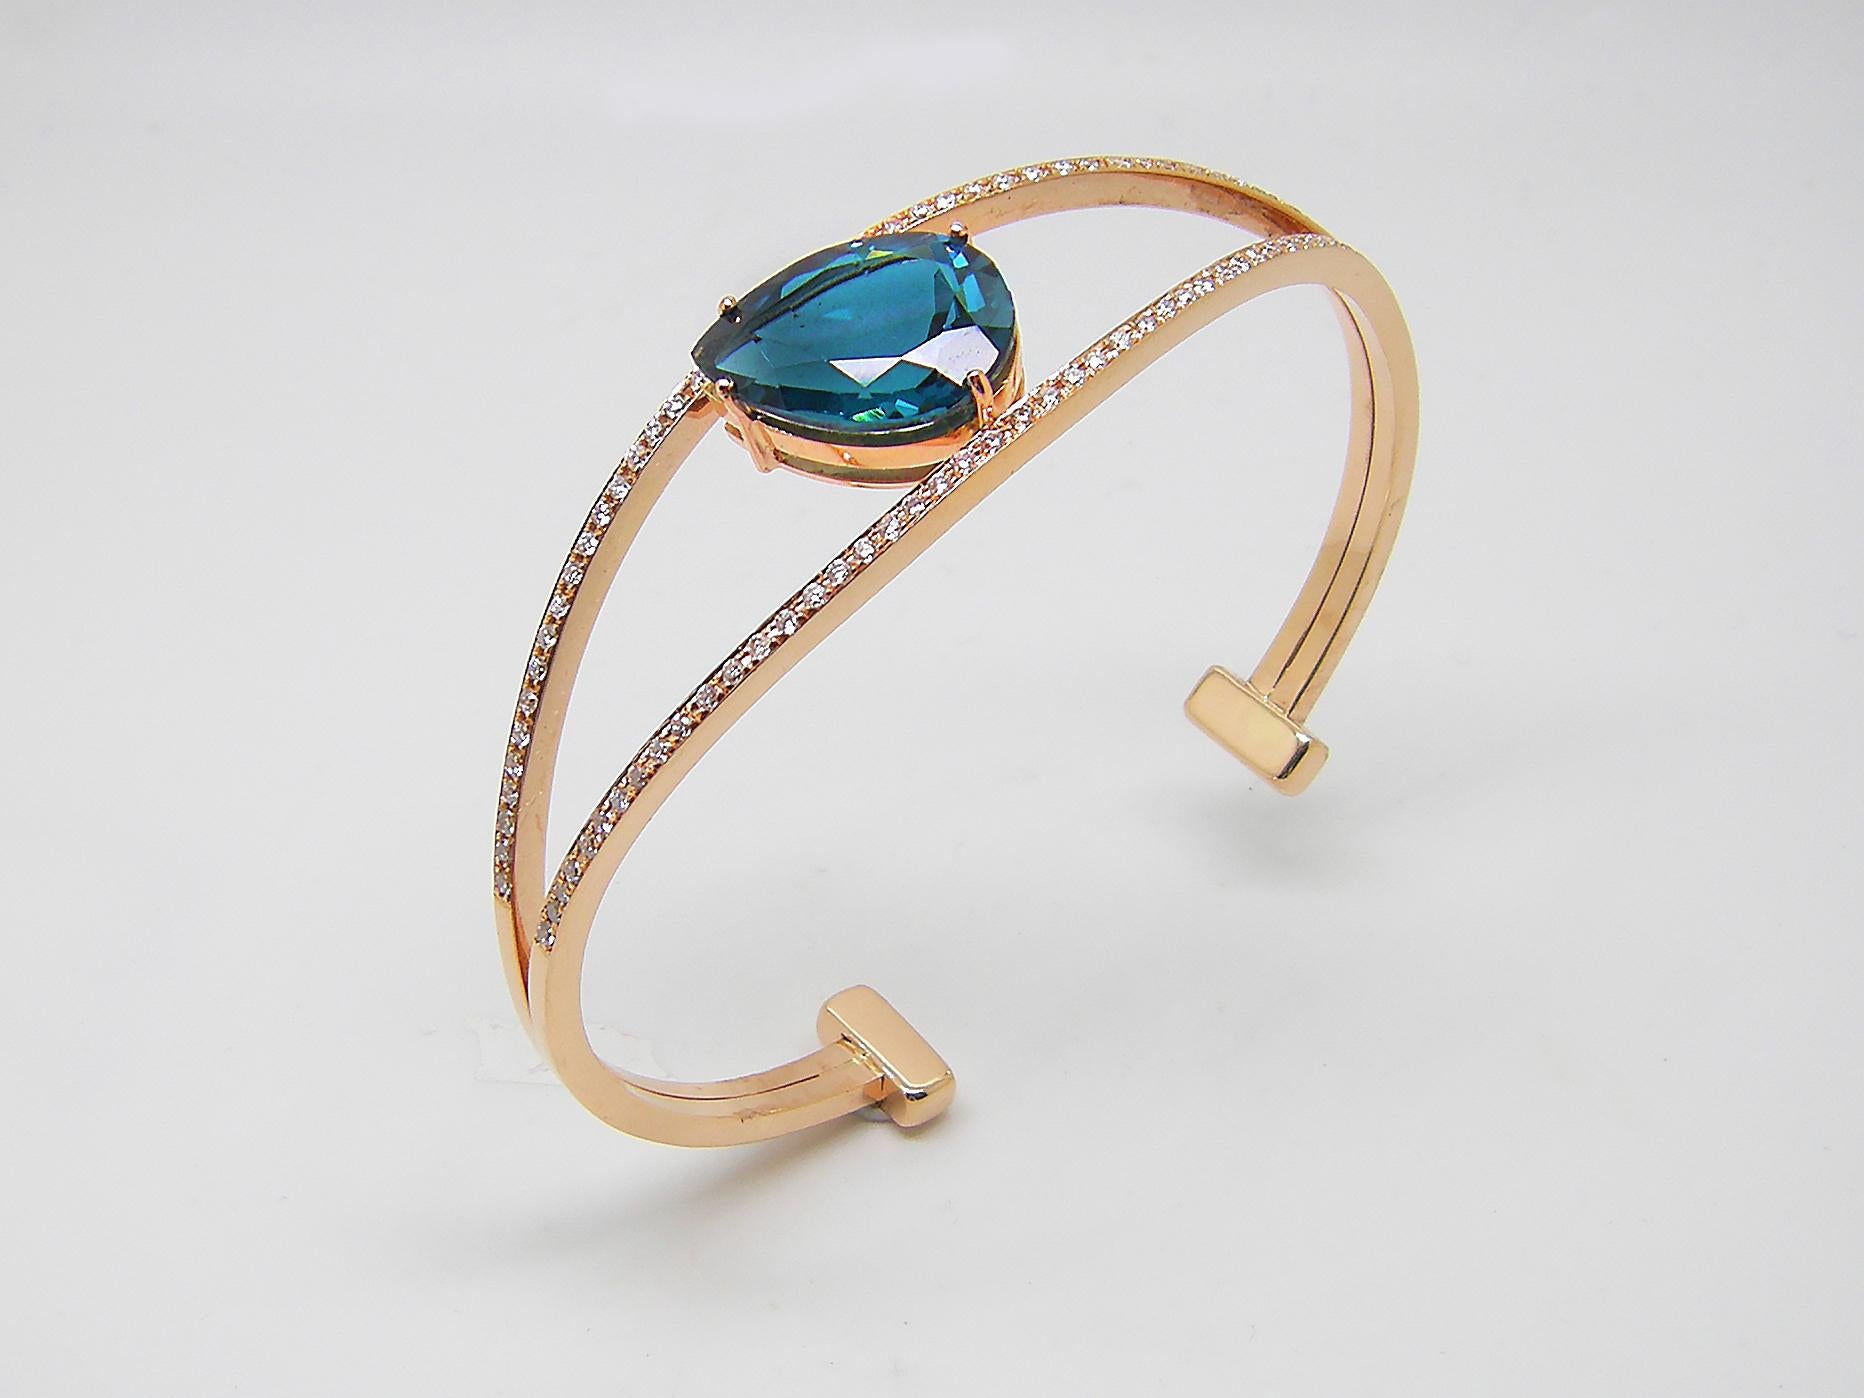 This S.Georgios designer bangle cuff bracelet is custom made of Rose gold 18 karats. The gorgeous cuff has brilliant cut white diamonds total weight of 0.80 Carat and a London Blue Topaz total weight of 10.20 Carat and is all set microscopically.
We